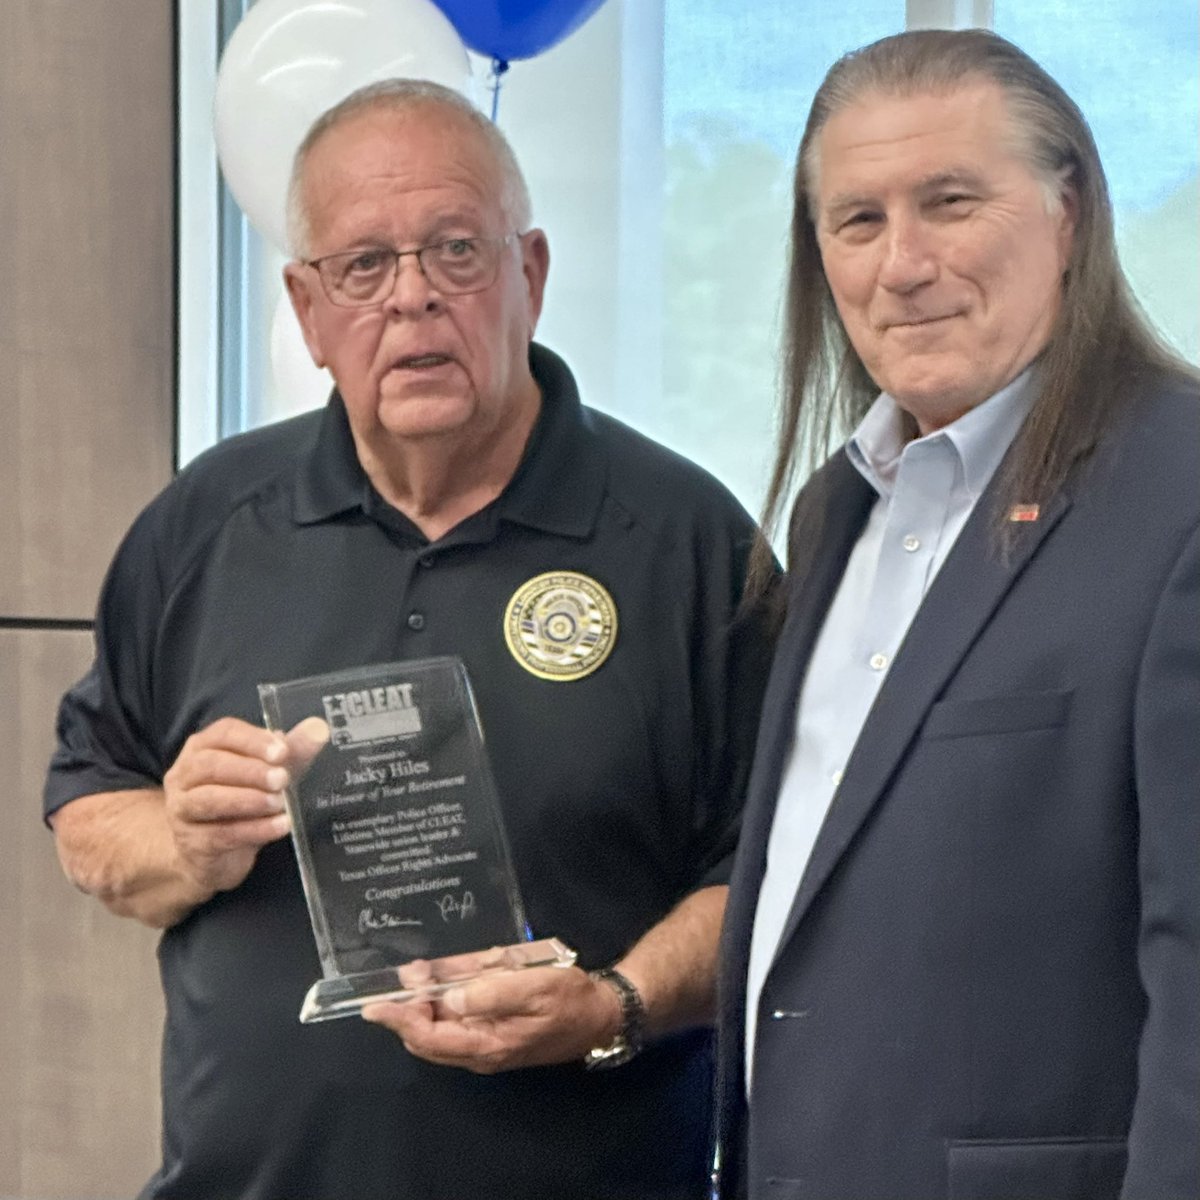 CLEAT Asst Director of Field Services John Kerr presented longtime East Texas CLEAT Loyalist Sgt. Jacky Hiles with a special recognition for all he has done for the law enforcement labor movement. Sgt Hiles retired as a Police Officer Friday after 6 years with Kilgore PD and 38…